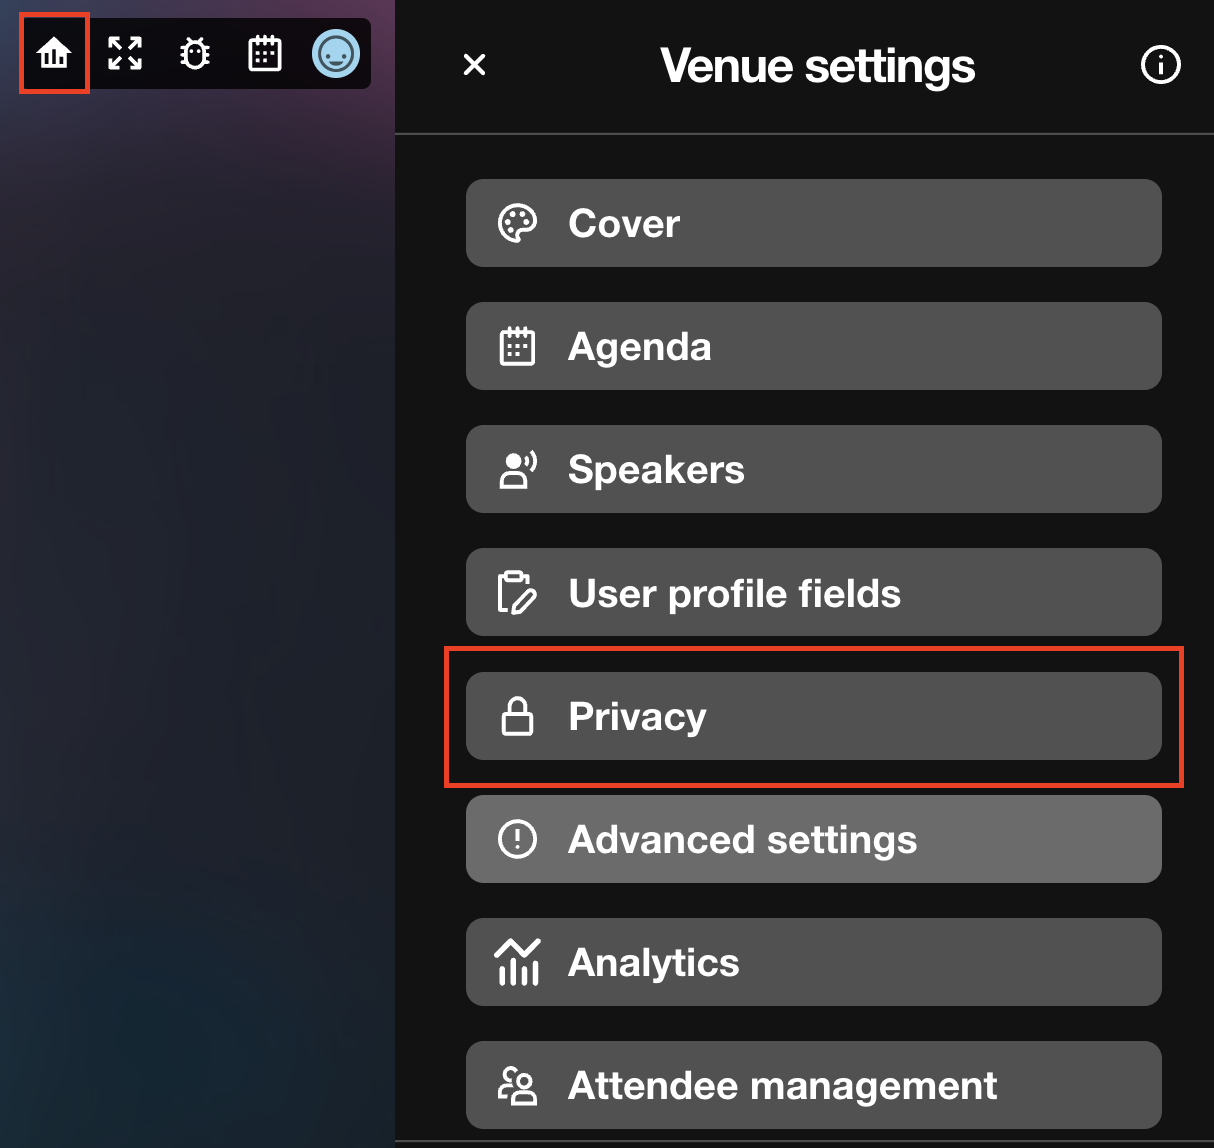 venue_settings_panel_with_privacy_highlighted.png